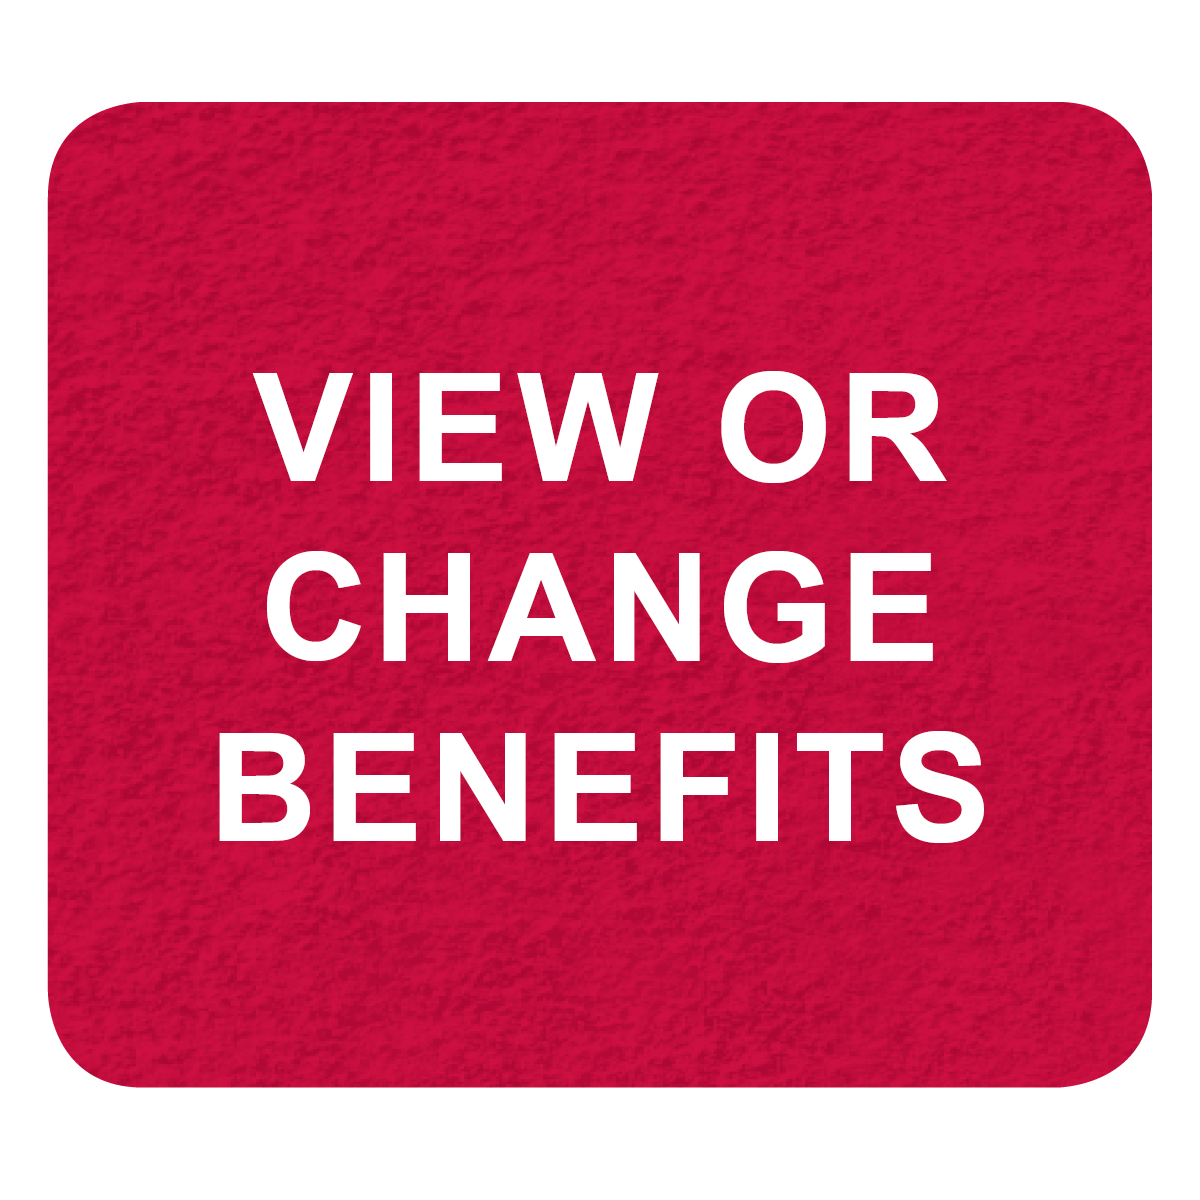 View or Change Benefits